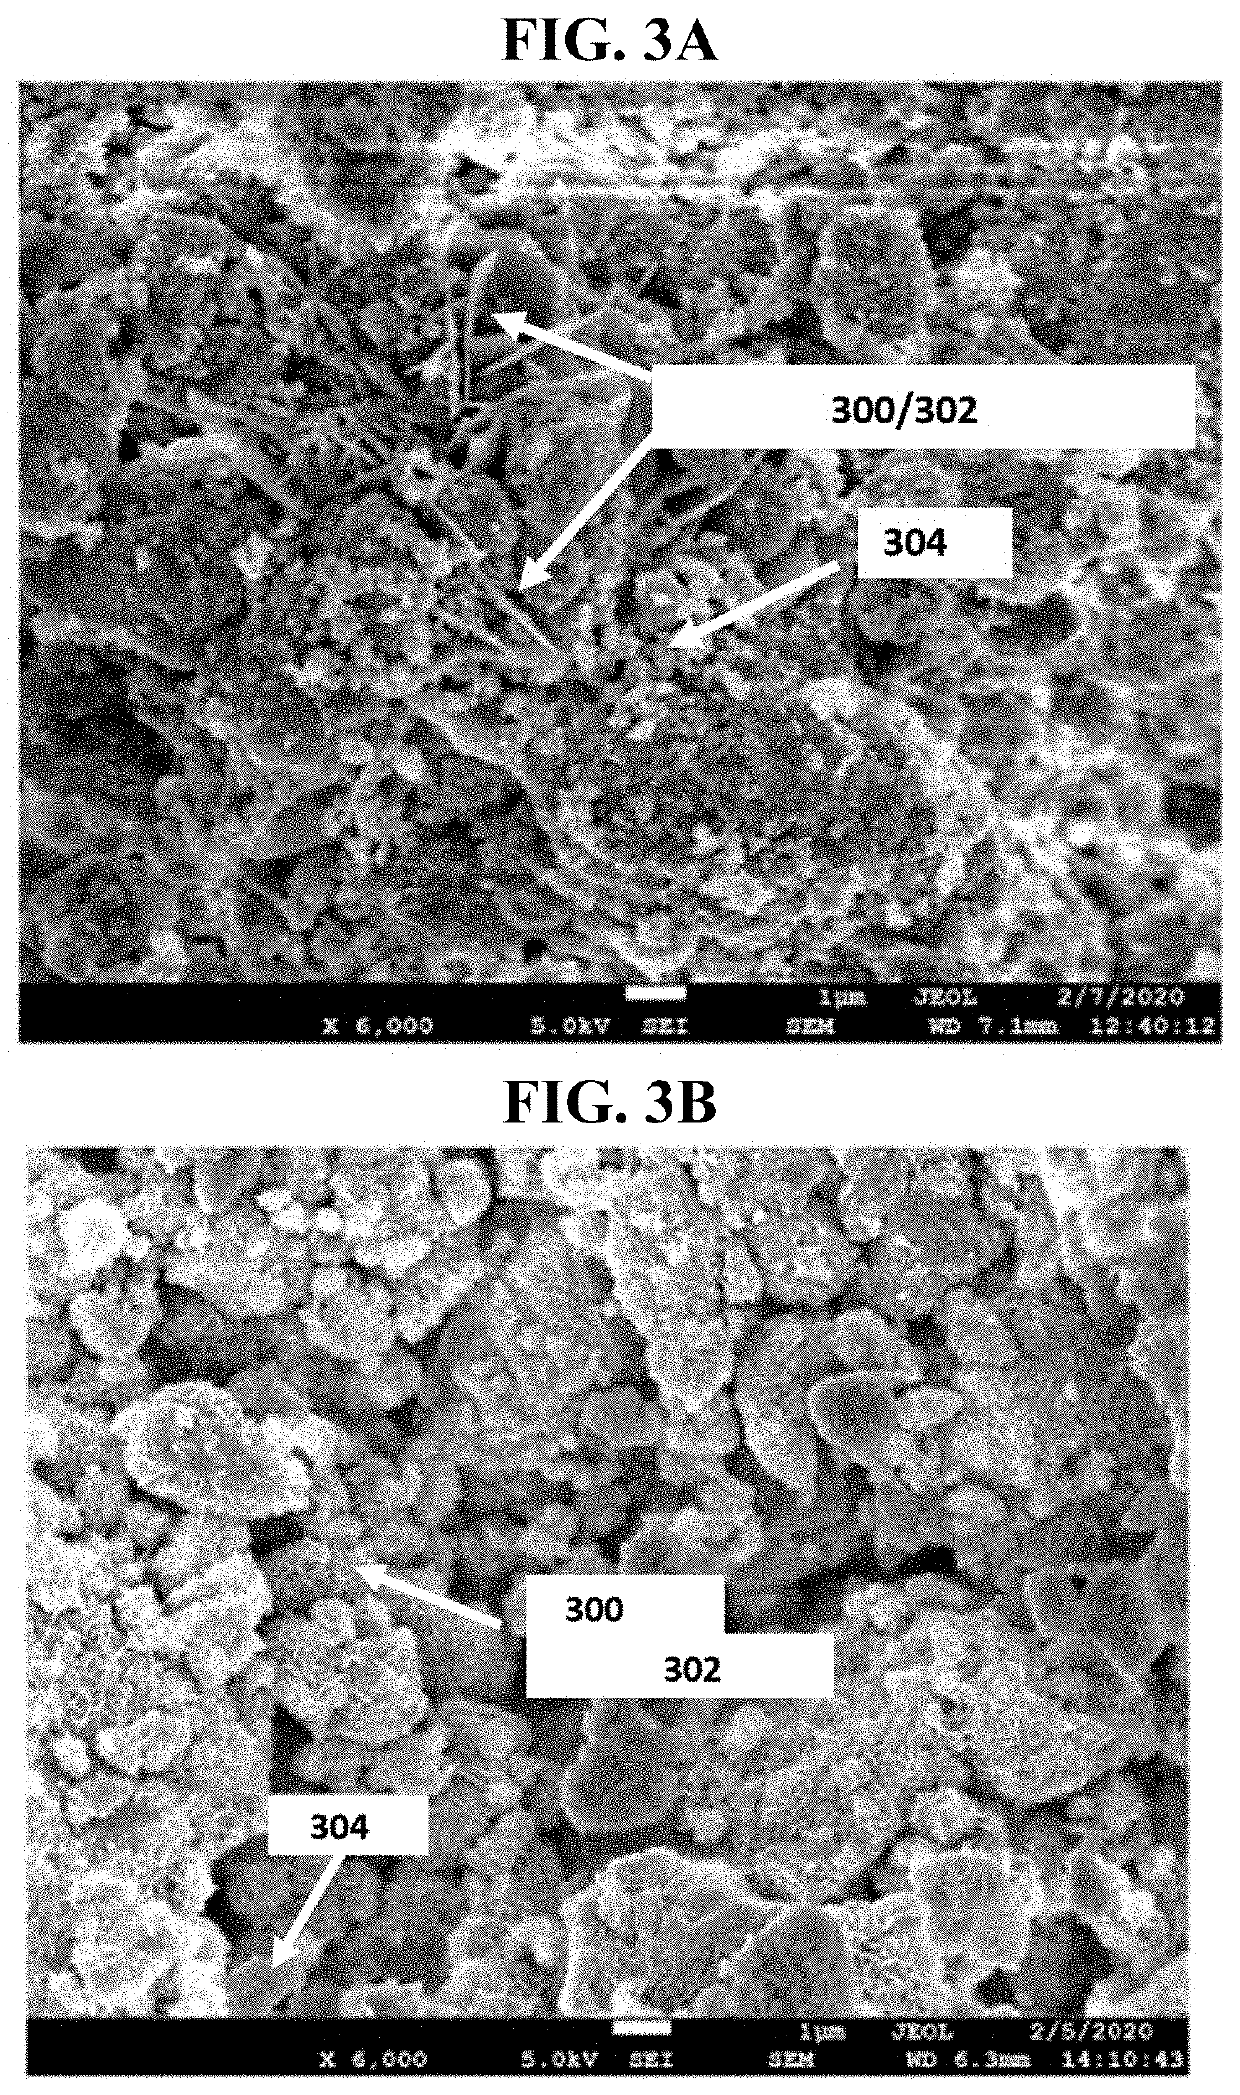 Carbonation of reactive magnesia cement (RMC)-based systems